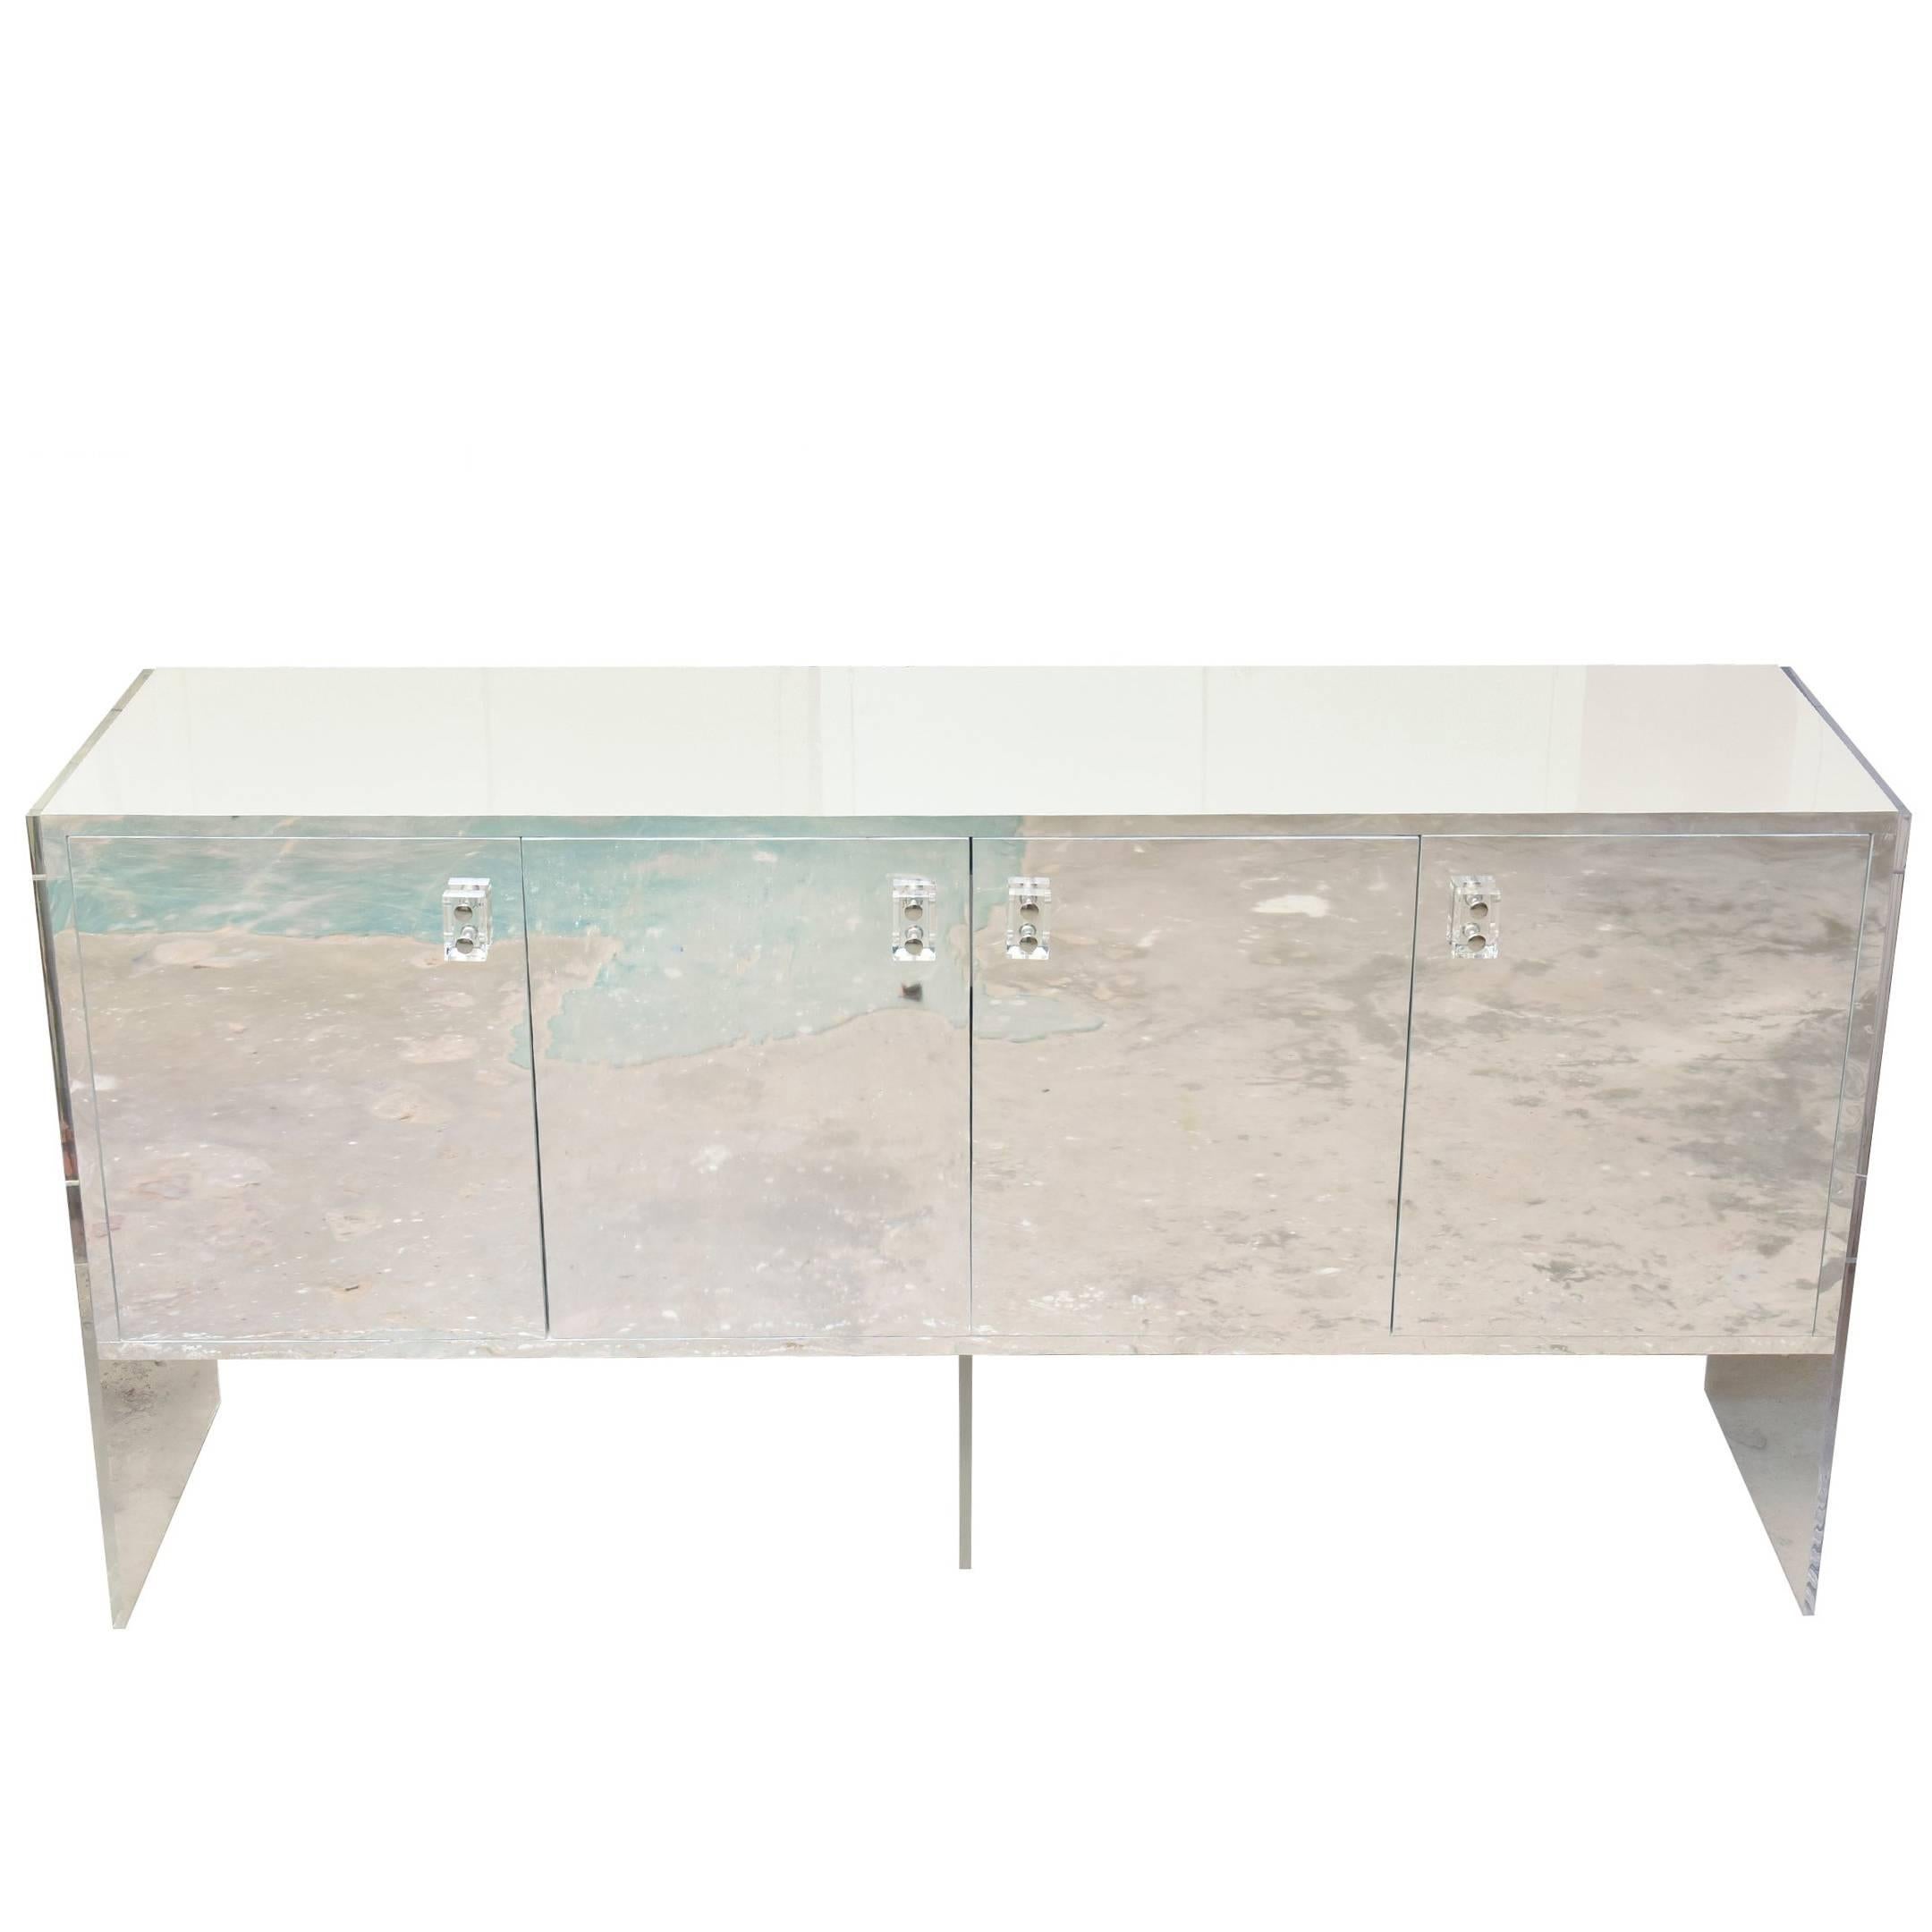 White Lacquer over Wood, Stainless Steel and Lucite Vintage Cabinet or Buffet